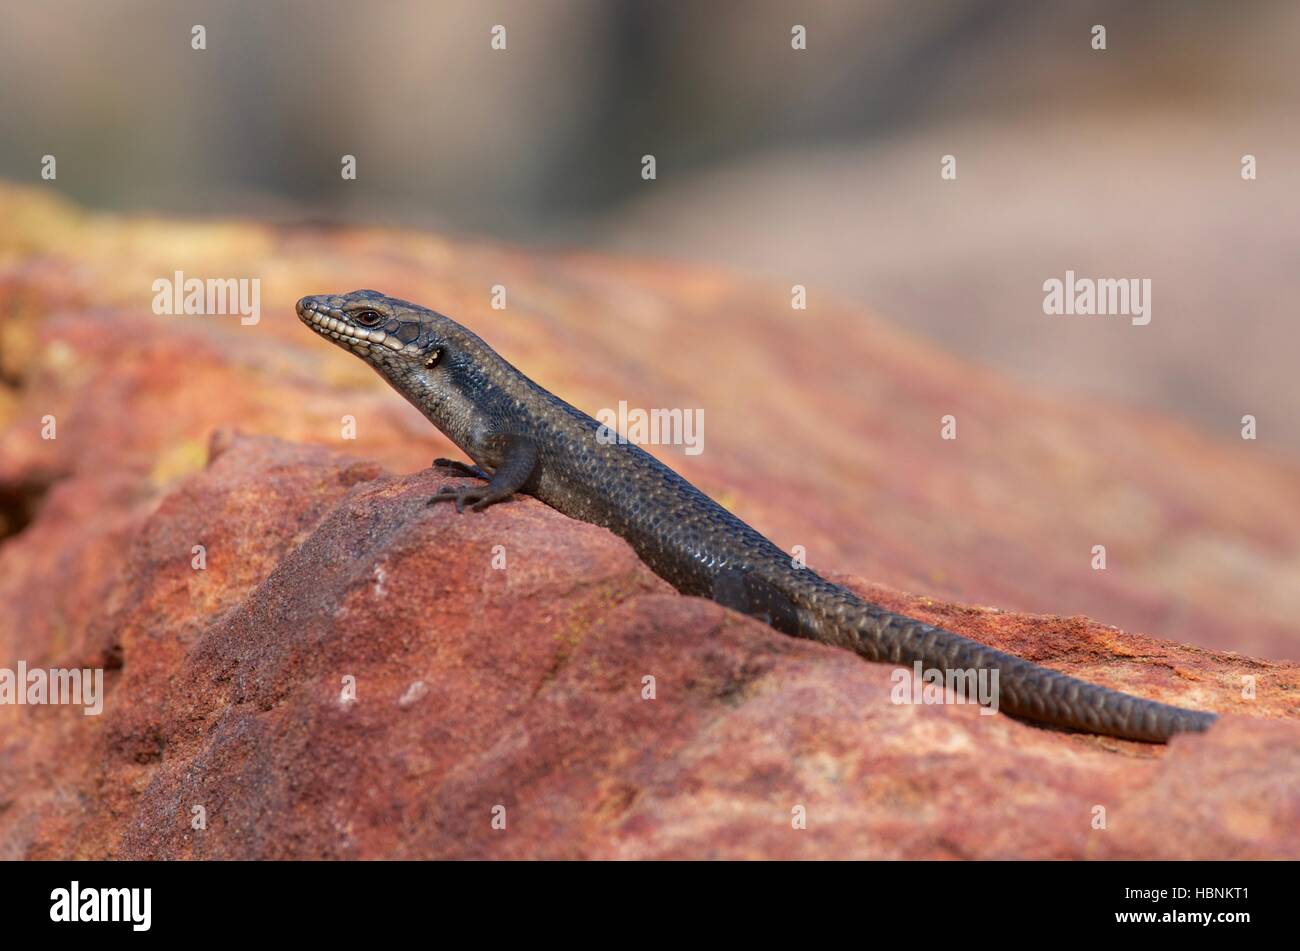 A Tree Skink or Rock Skink (Egernia striolata) on a red rock outcrop at Flinders Ranges National Park, South Australia Stock Photo